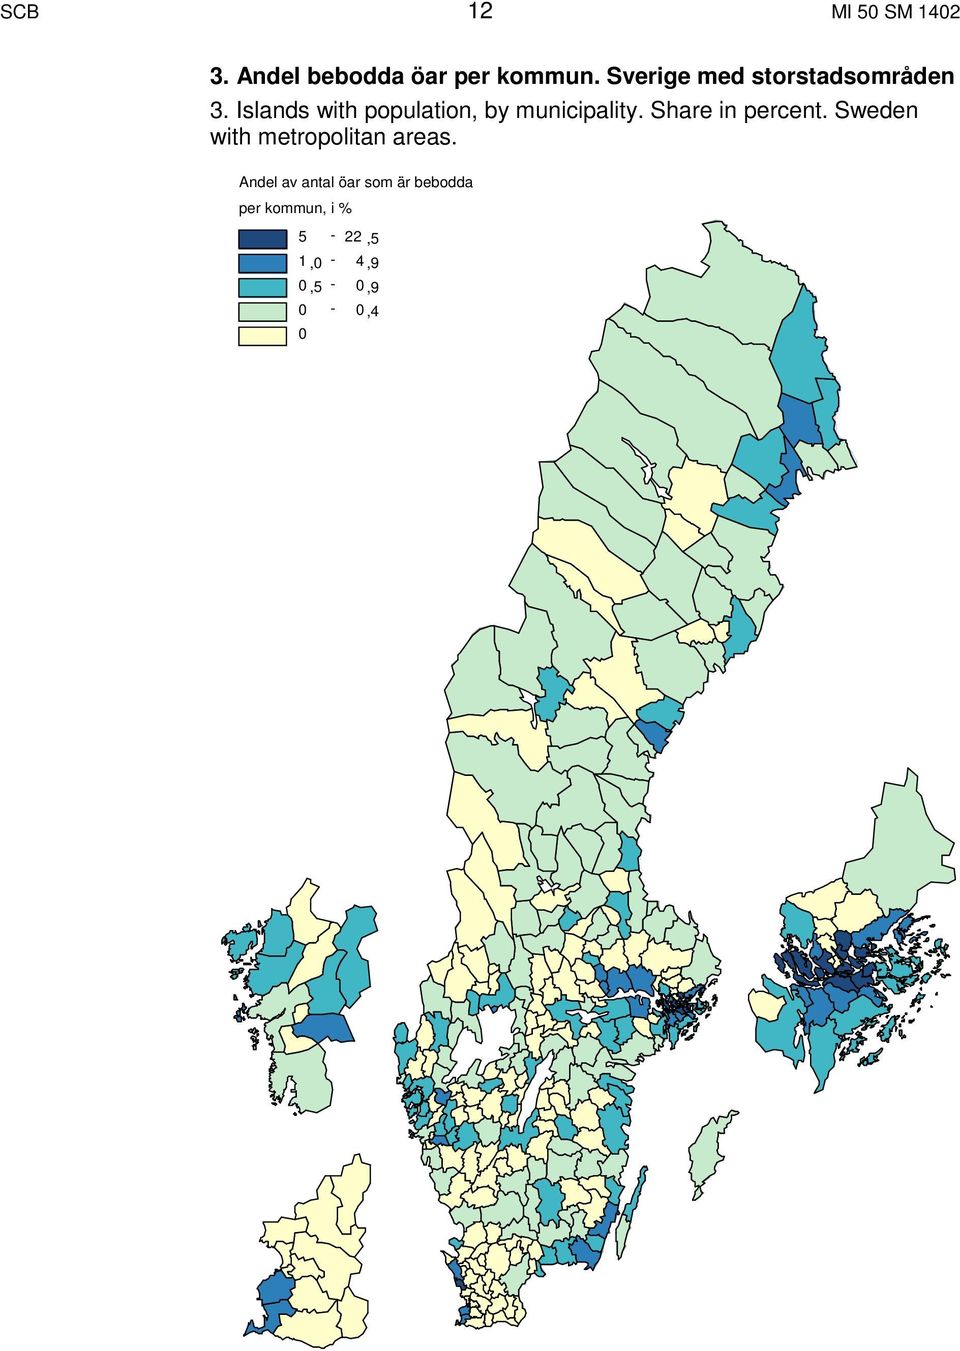 Islands with population, by municipality. Share in percent.